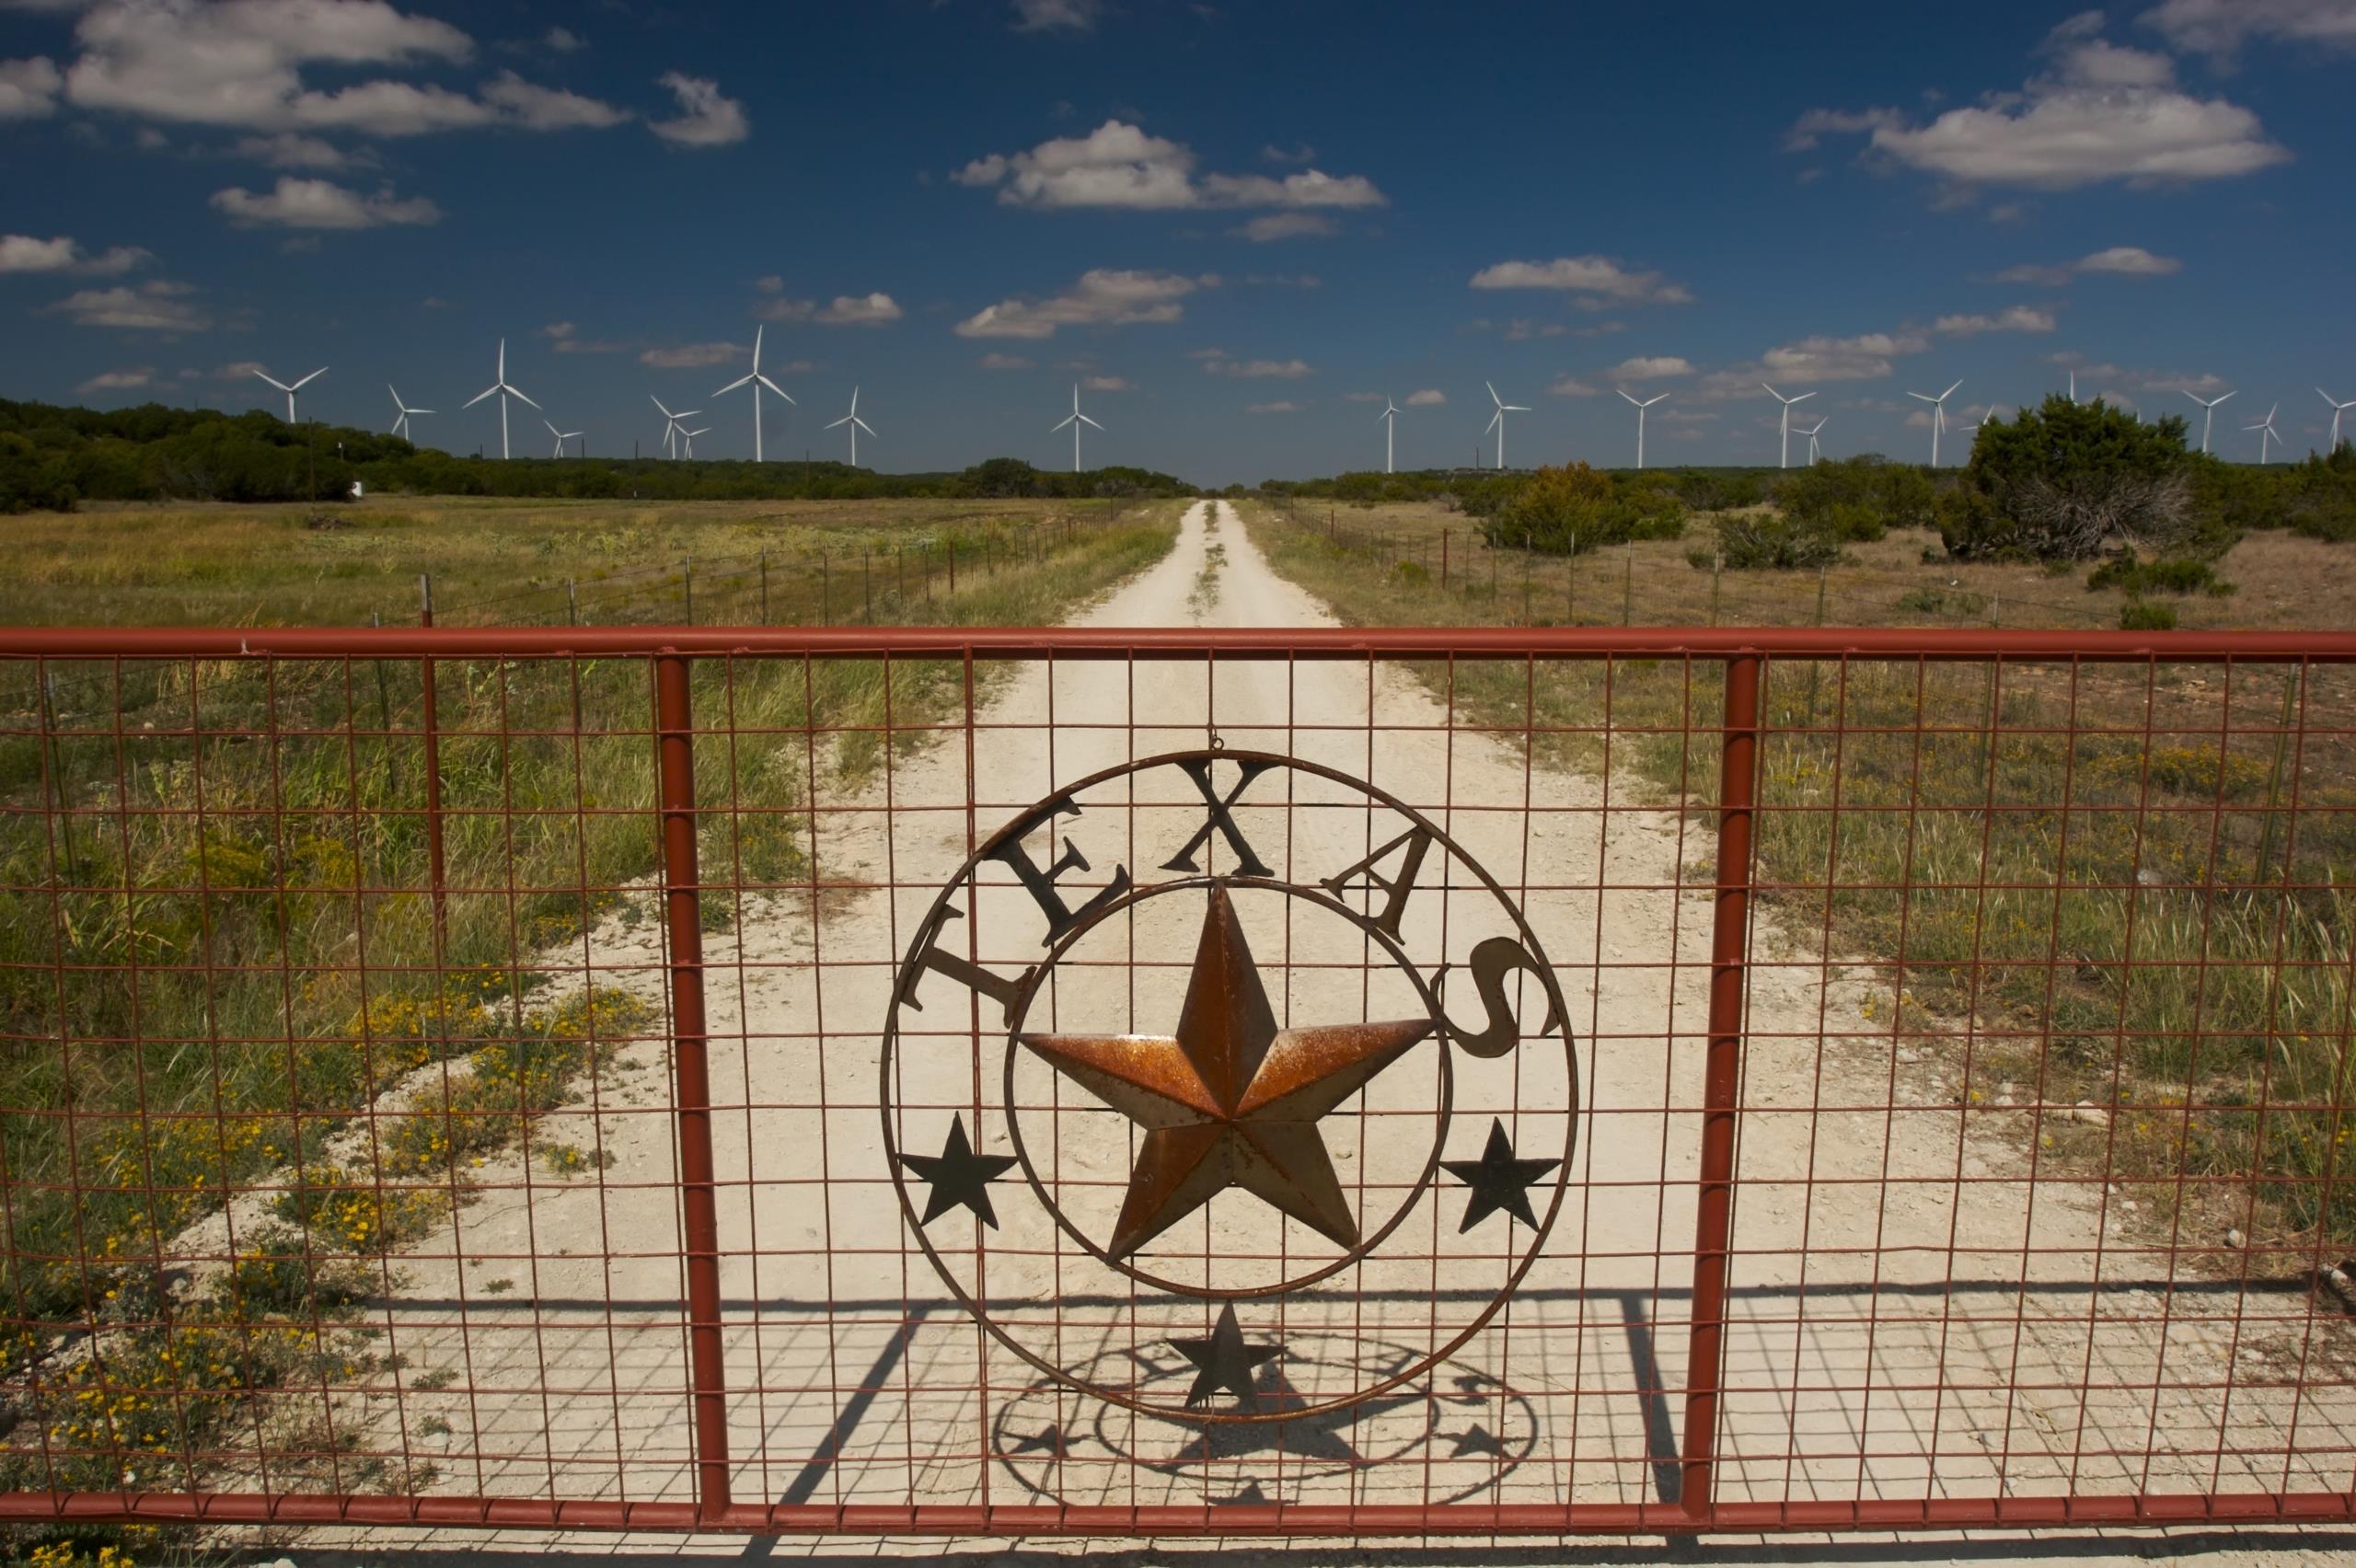 Closed Texas emblem gate, which leads up to a wind farm